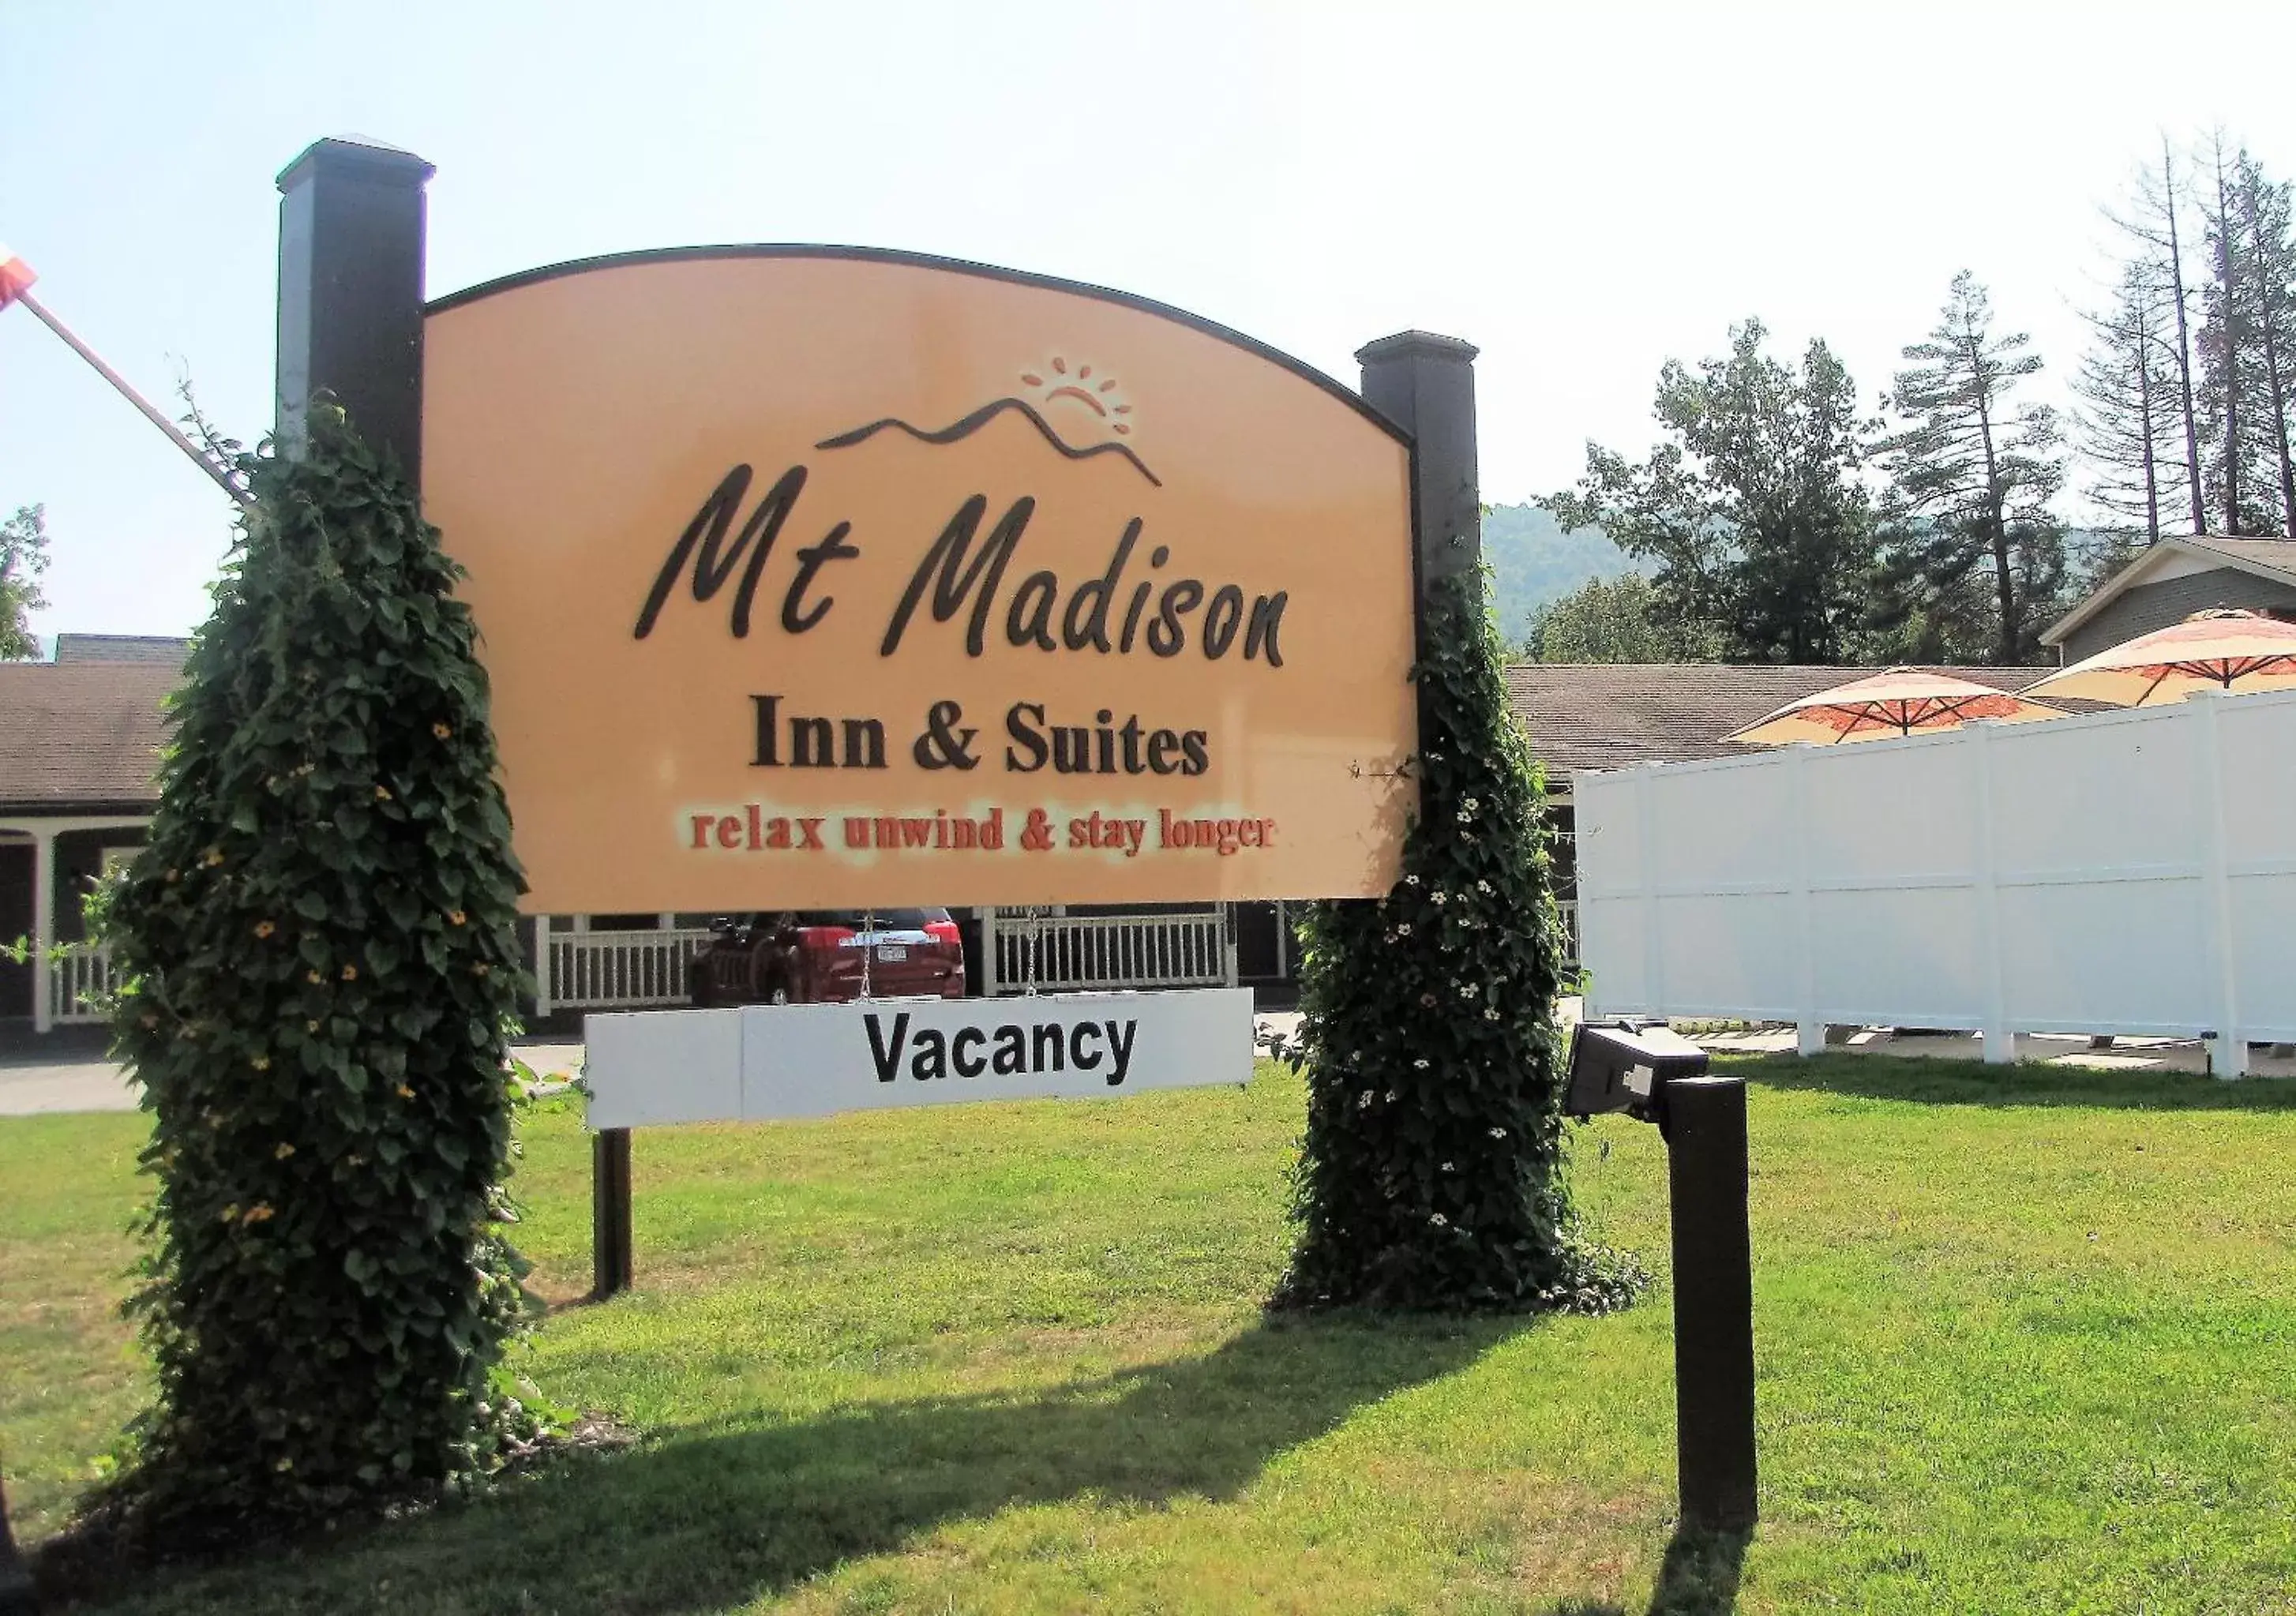 Property building in Mt. Madison Inn & Suites